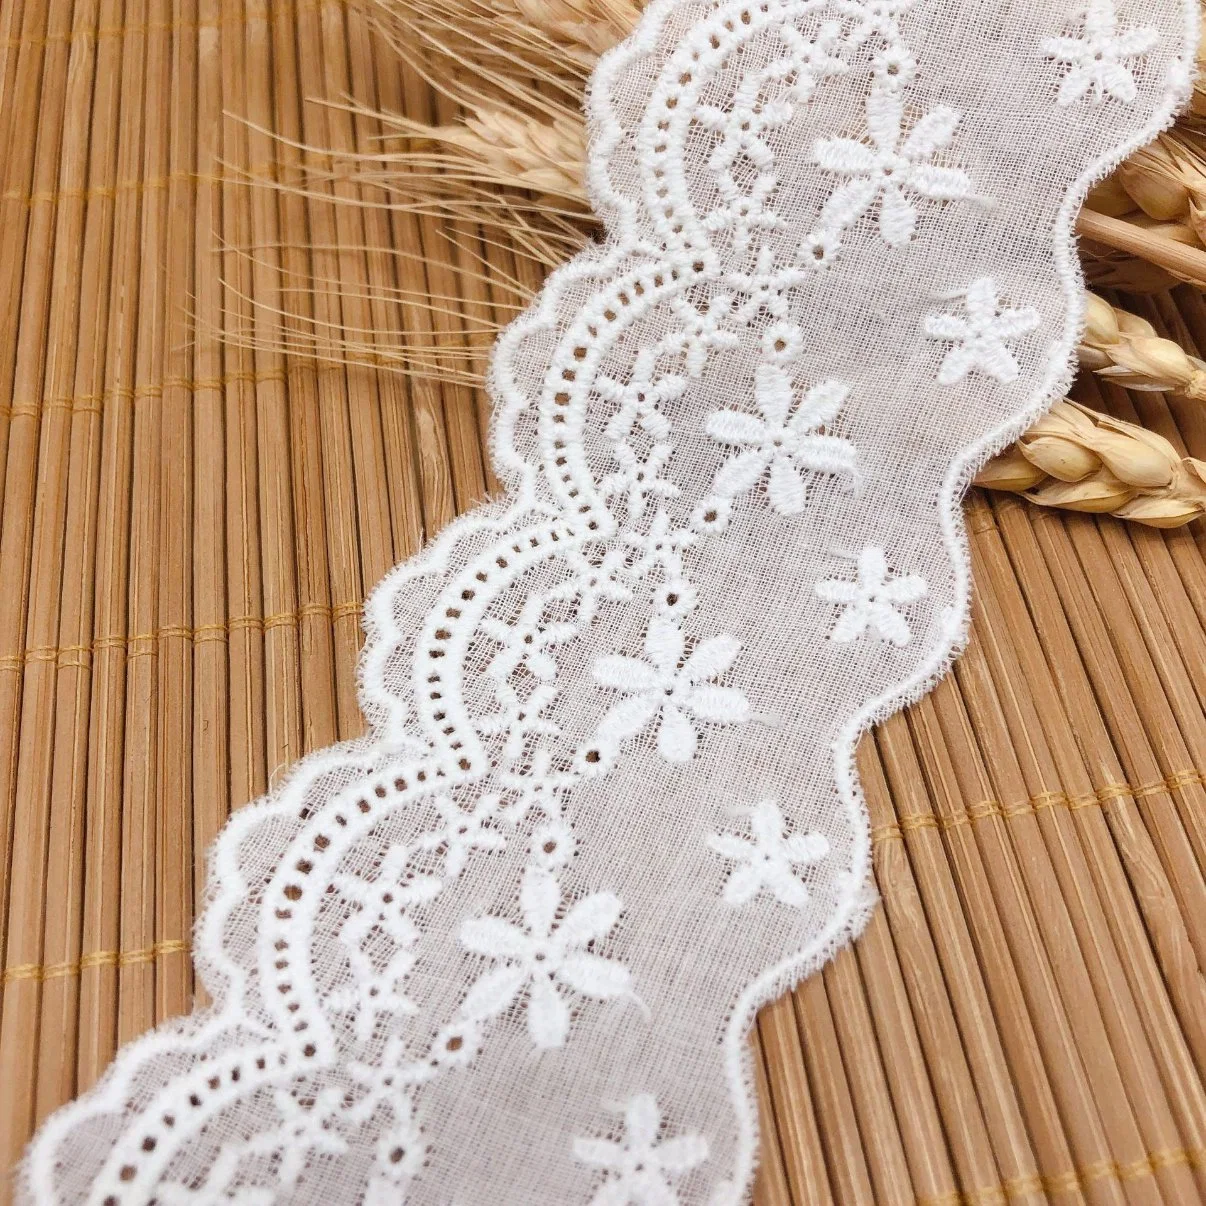 Double-Sided Lace Cotton Barcode Home Soft Decorative Lace Fabric Water-Soluble Embroidery Clothing Accessories